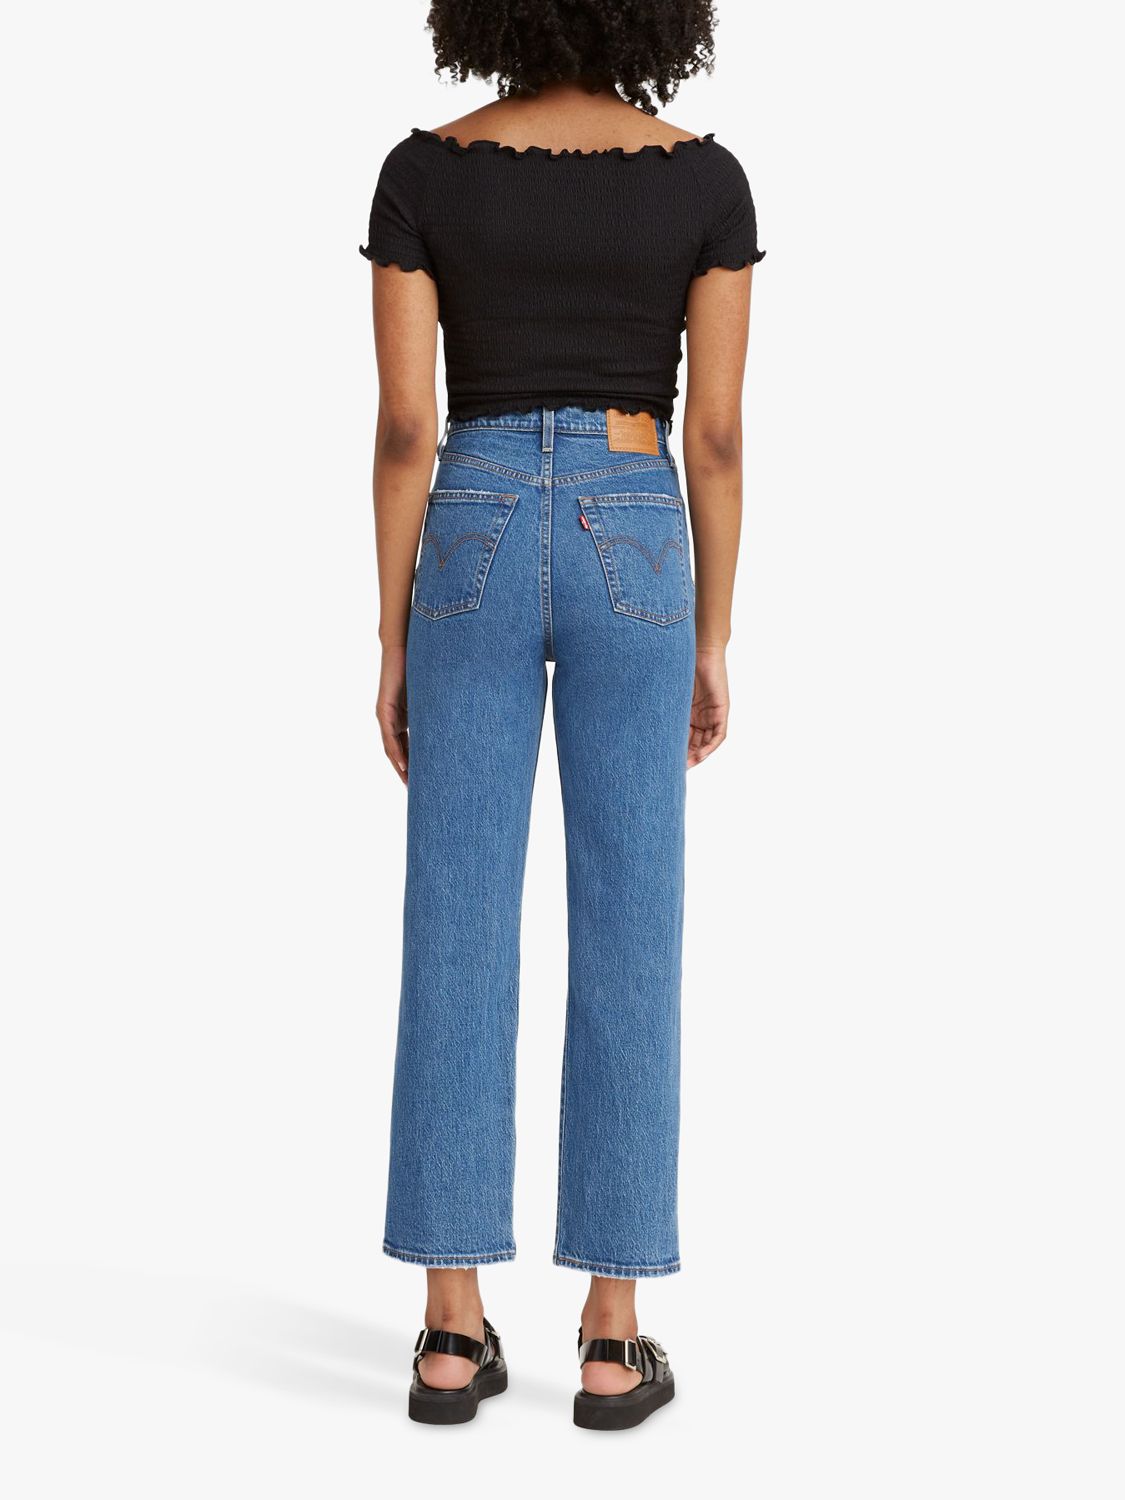 Levi's Ribcage Straight Cut Cropped Jeans, Jazz Pop at John Lewis ...